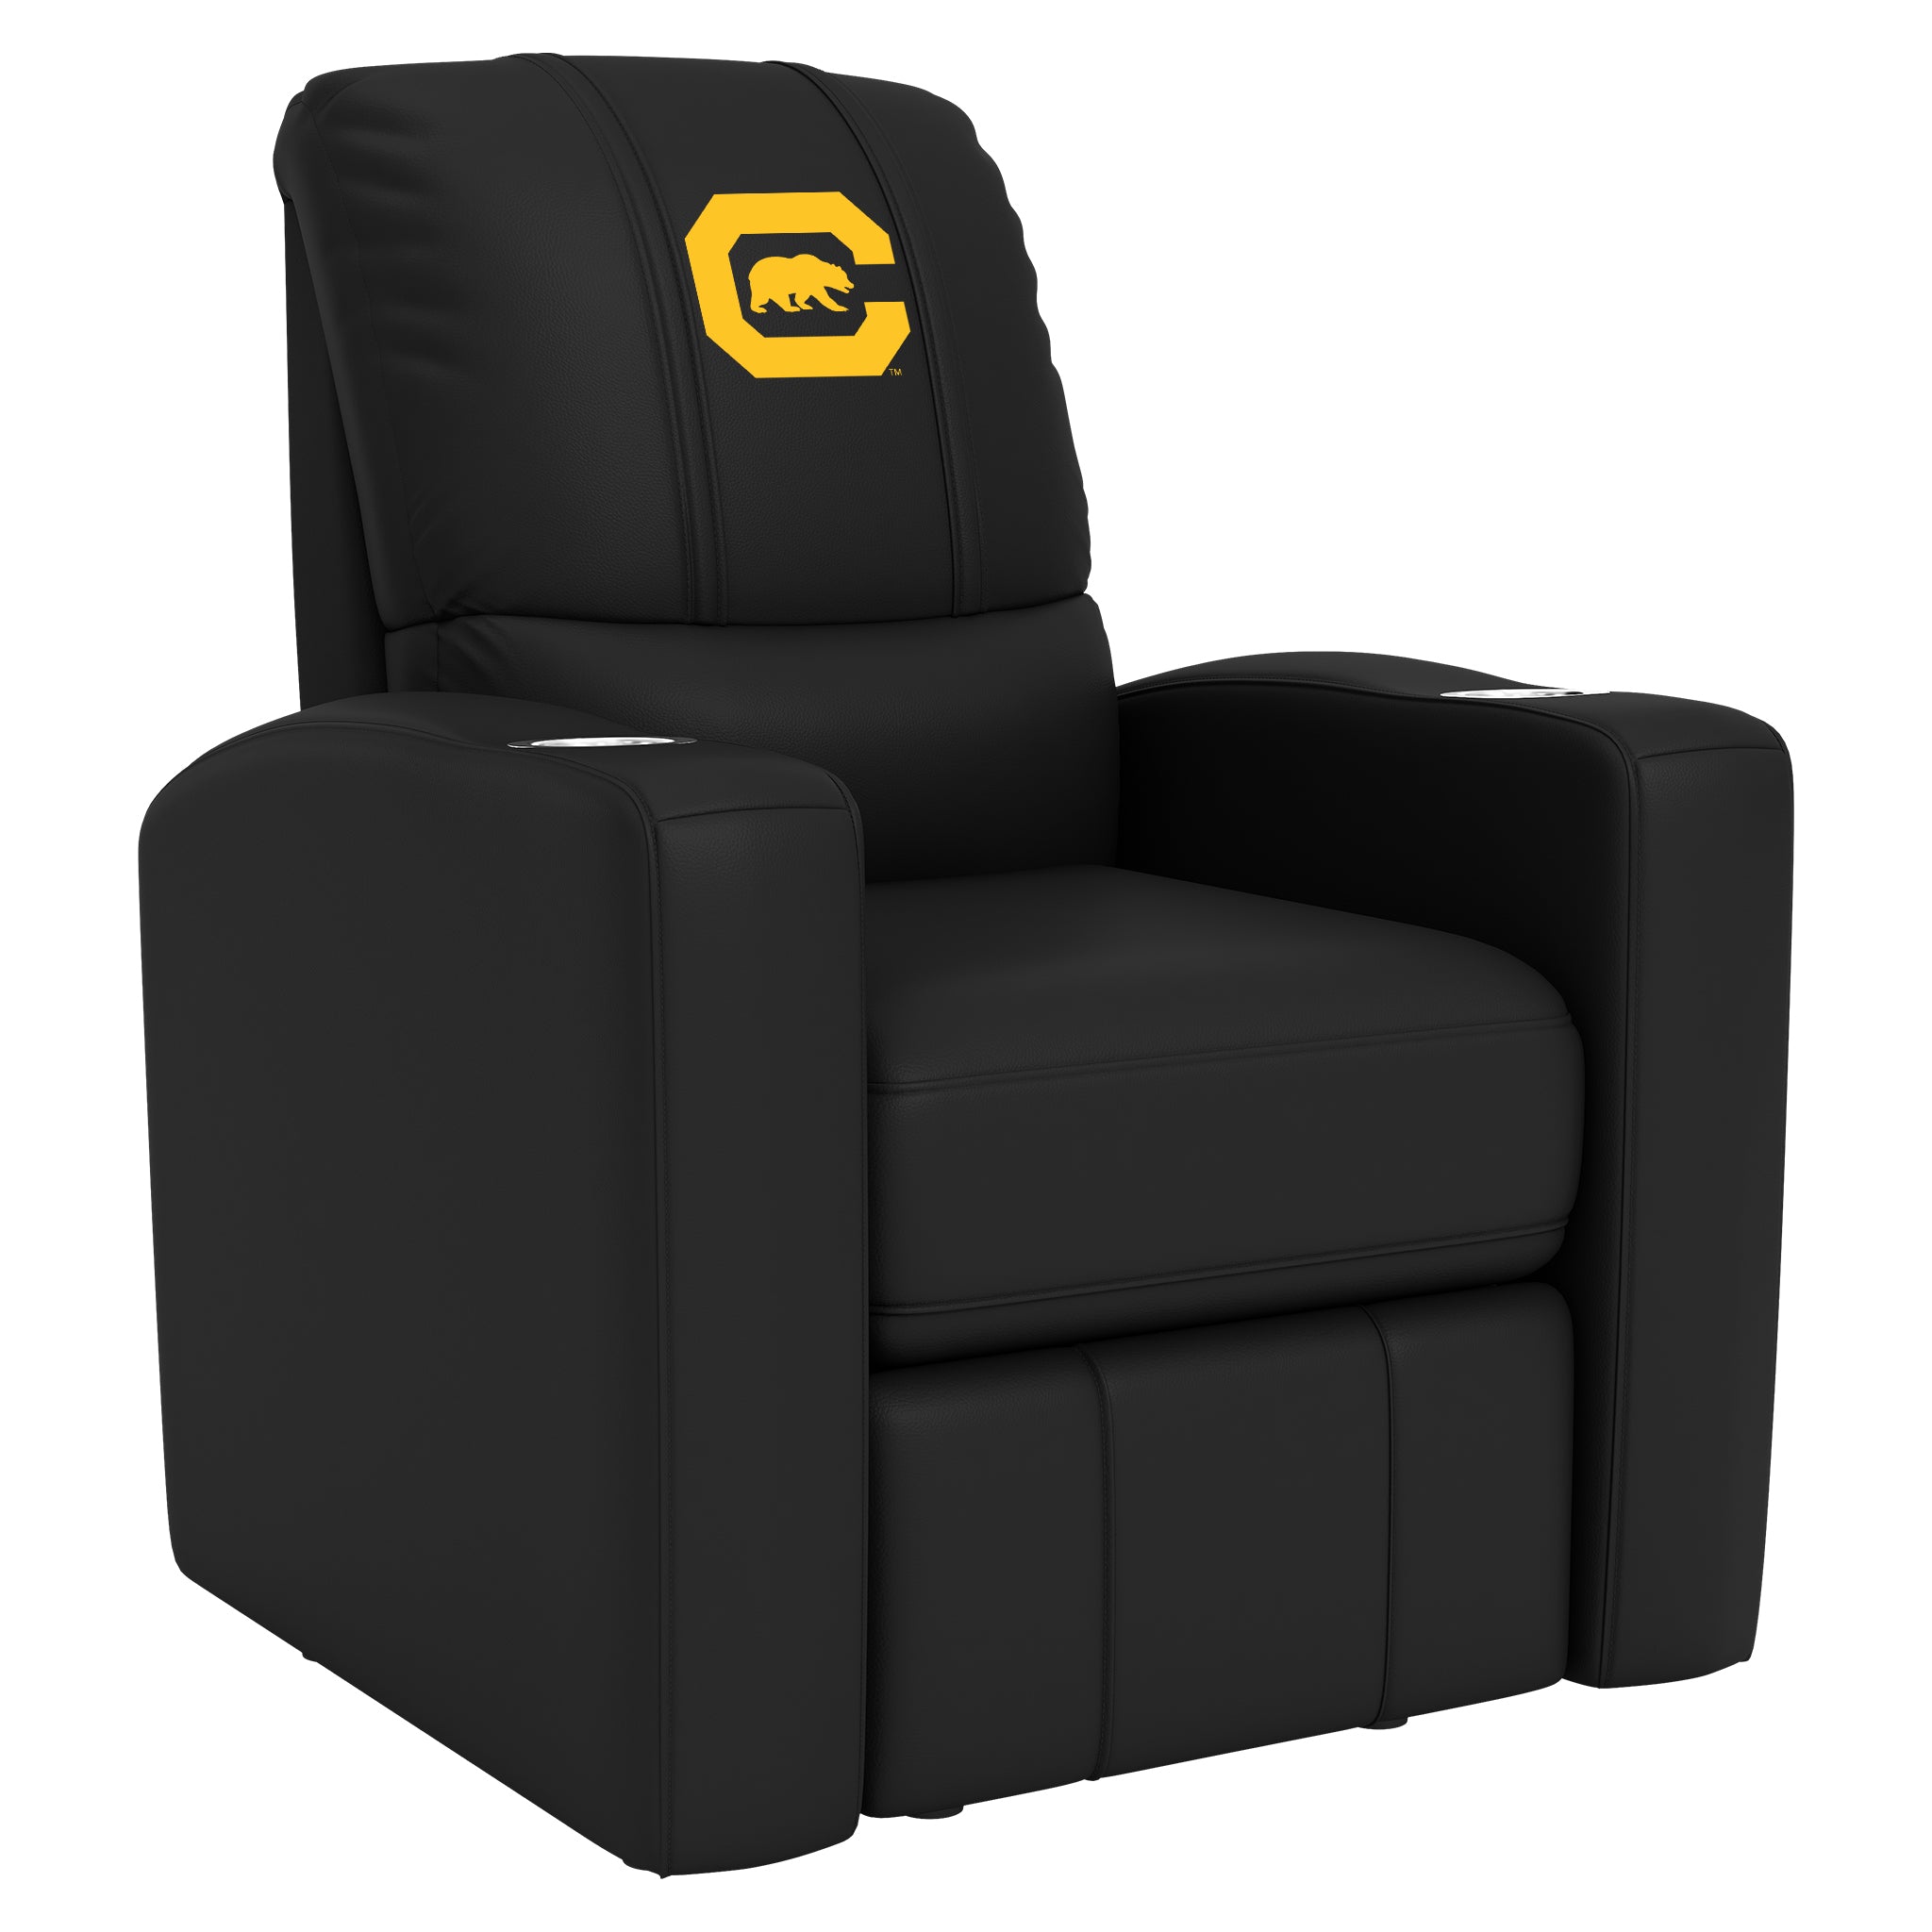 California Golden Bears Stealth Recliner with California Golden Bears Secondary Logo